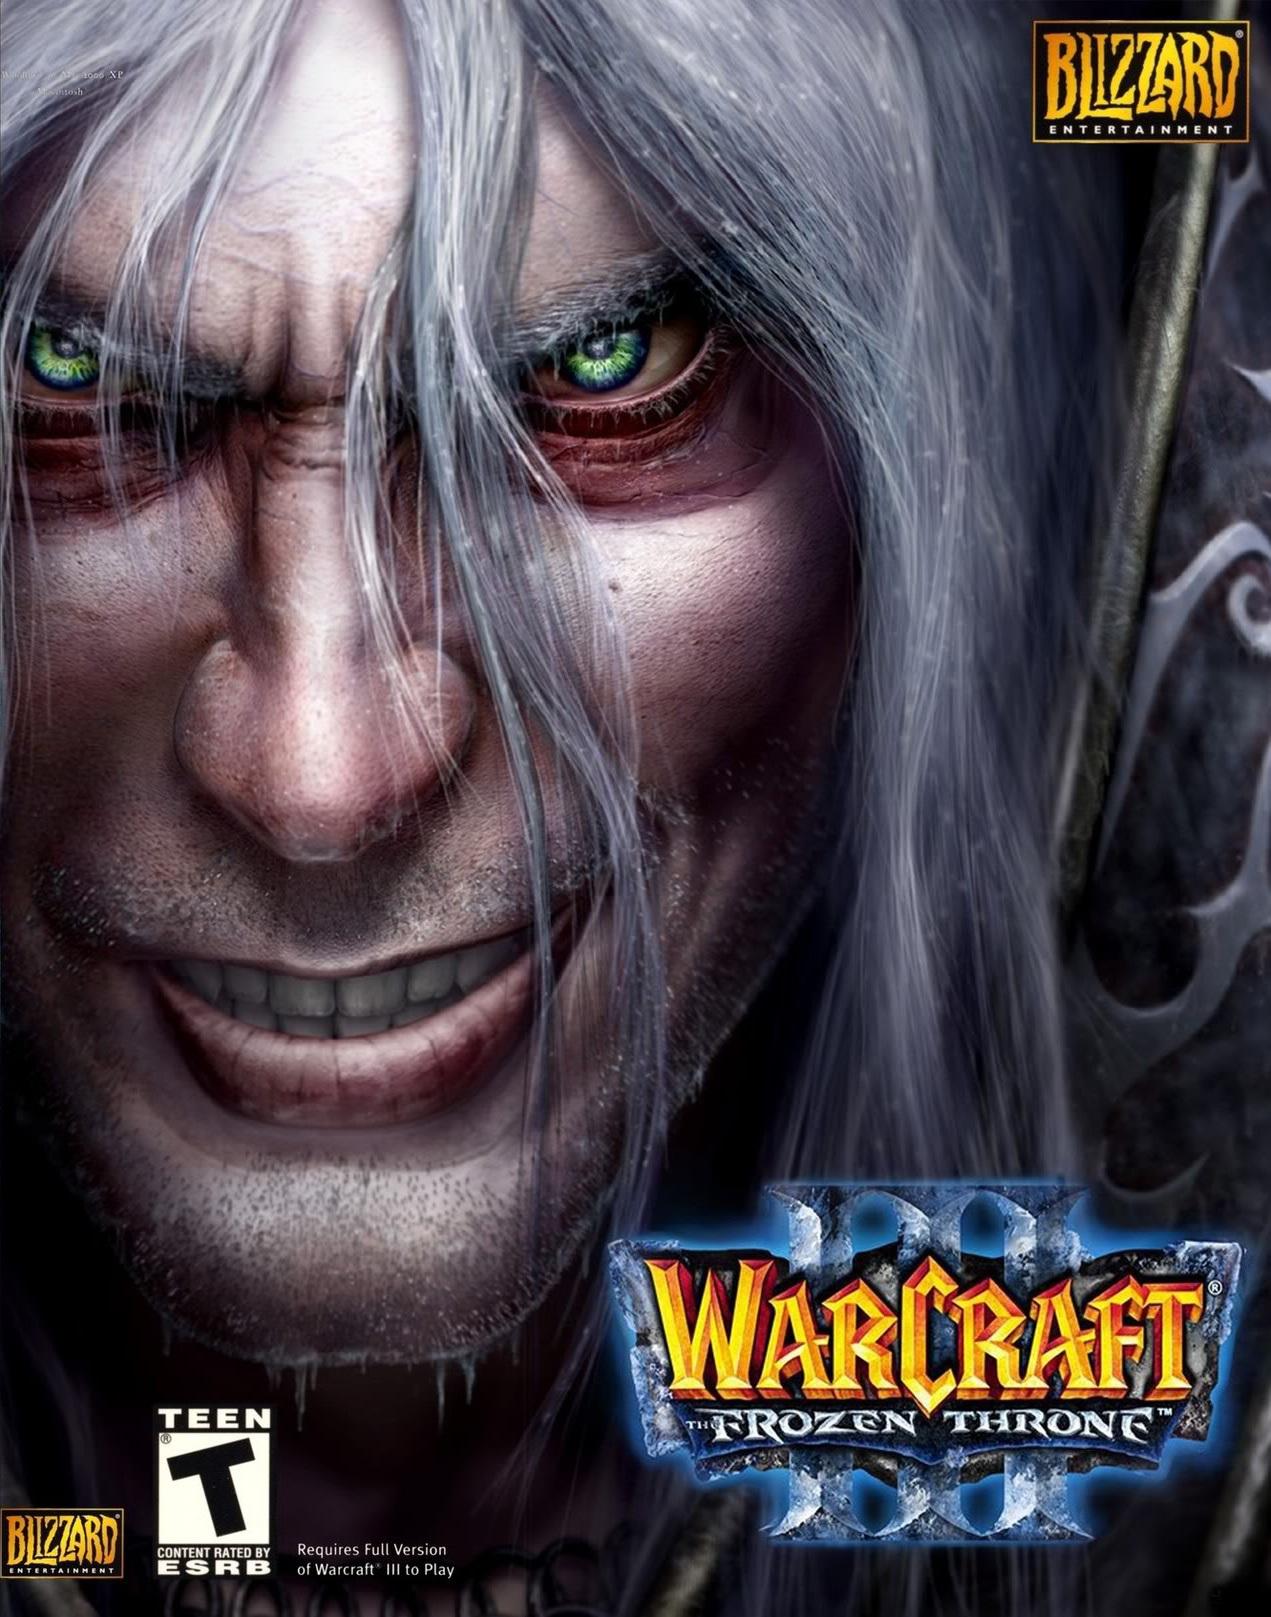 Frozen throne download free exe